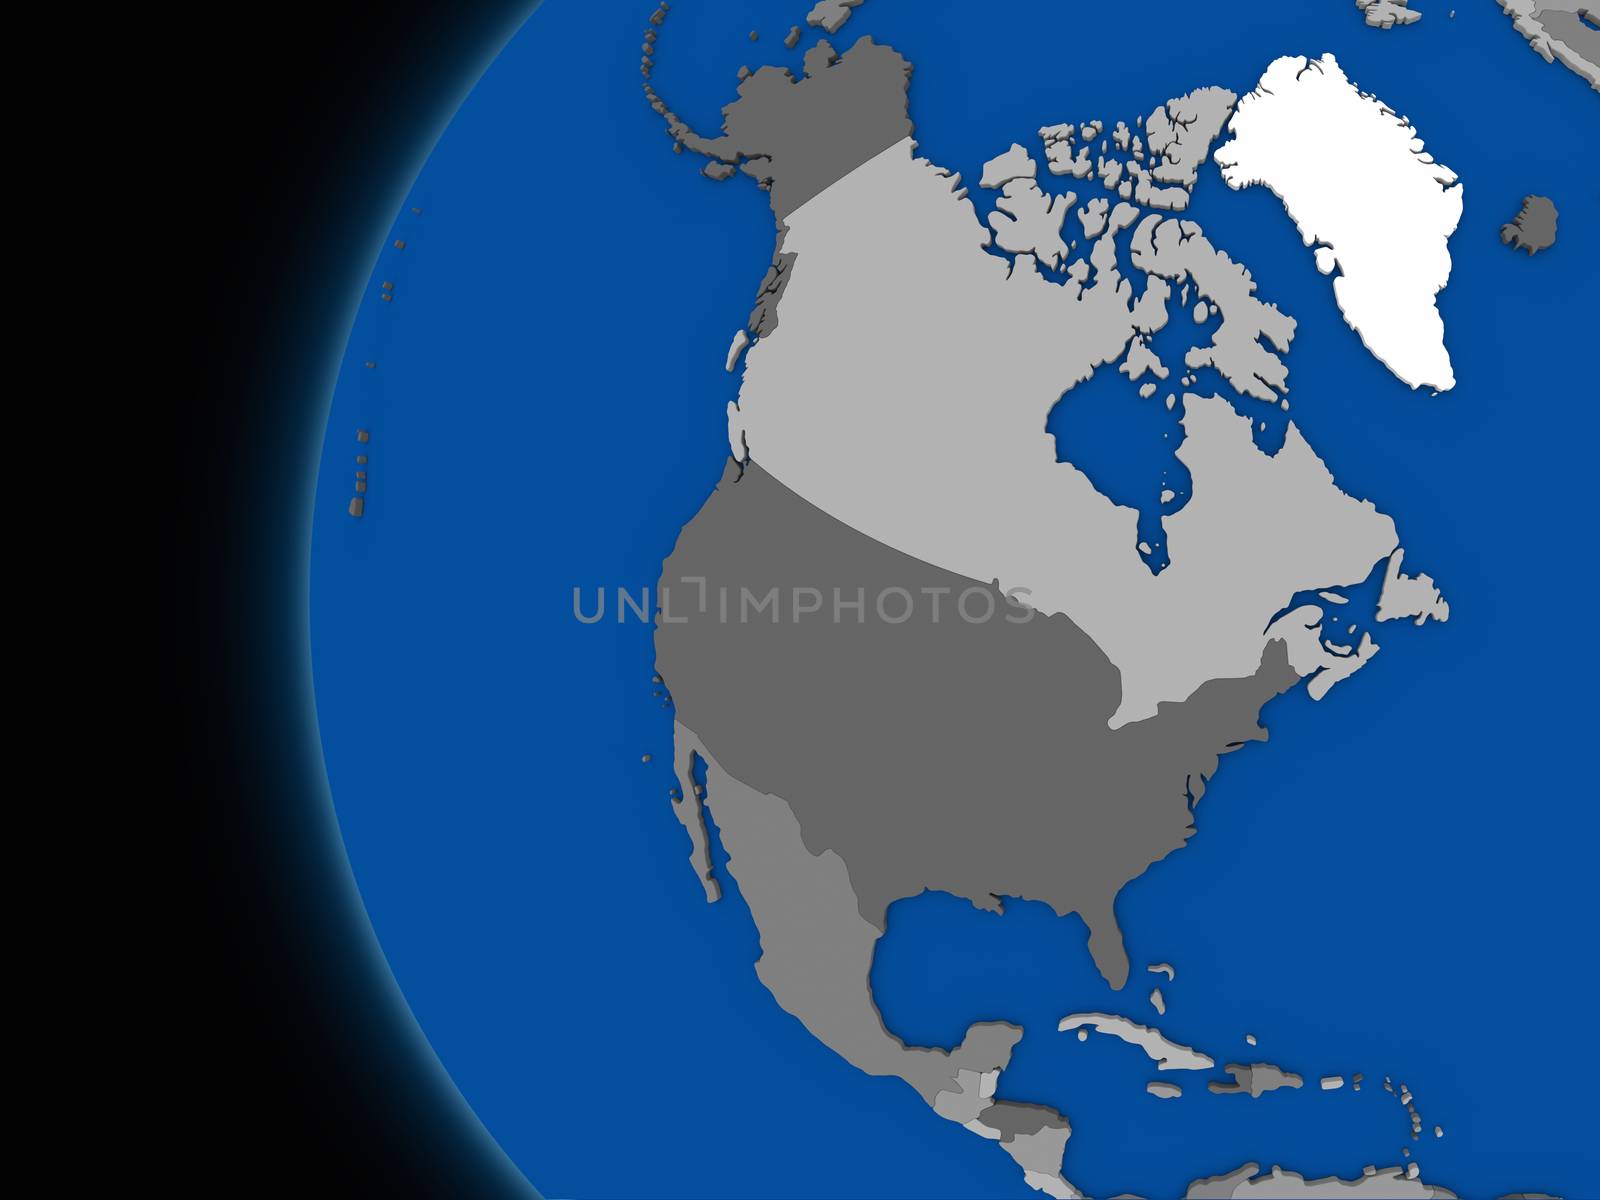 north american continent on political Earth by Harvepino